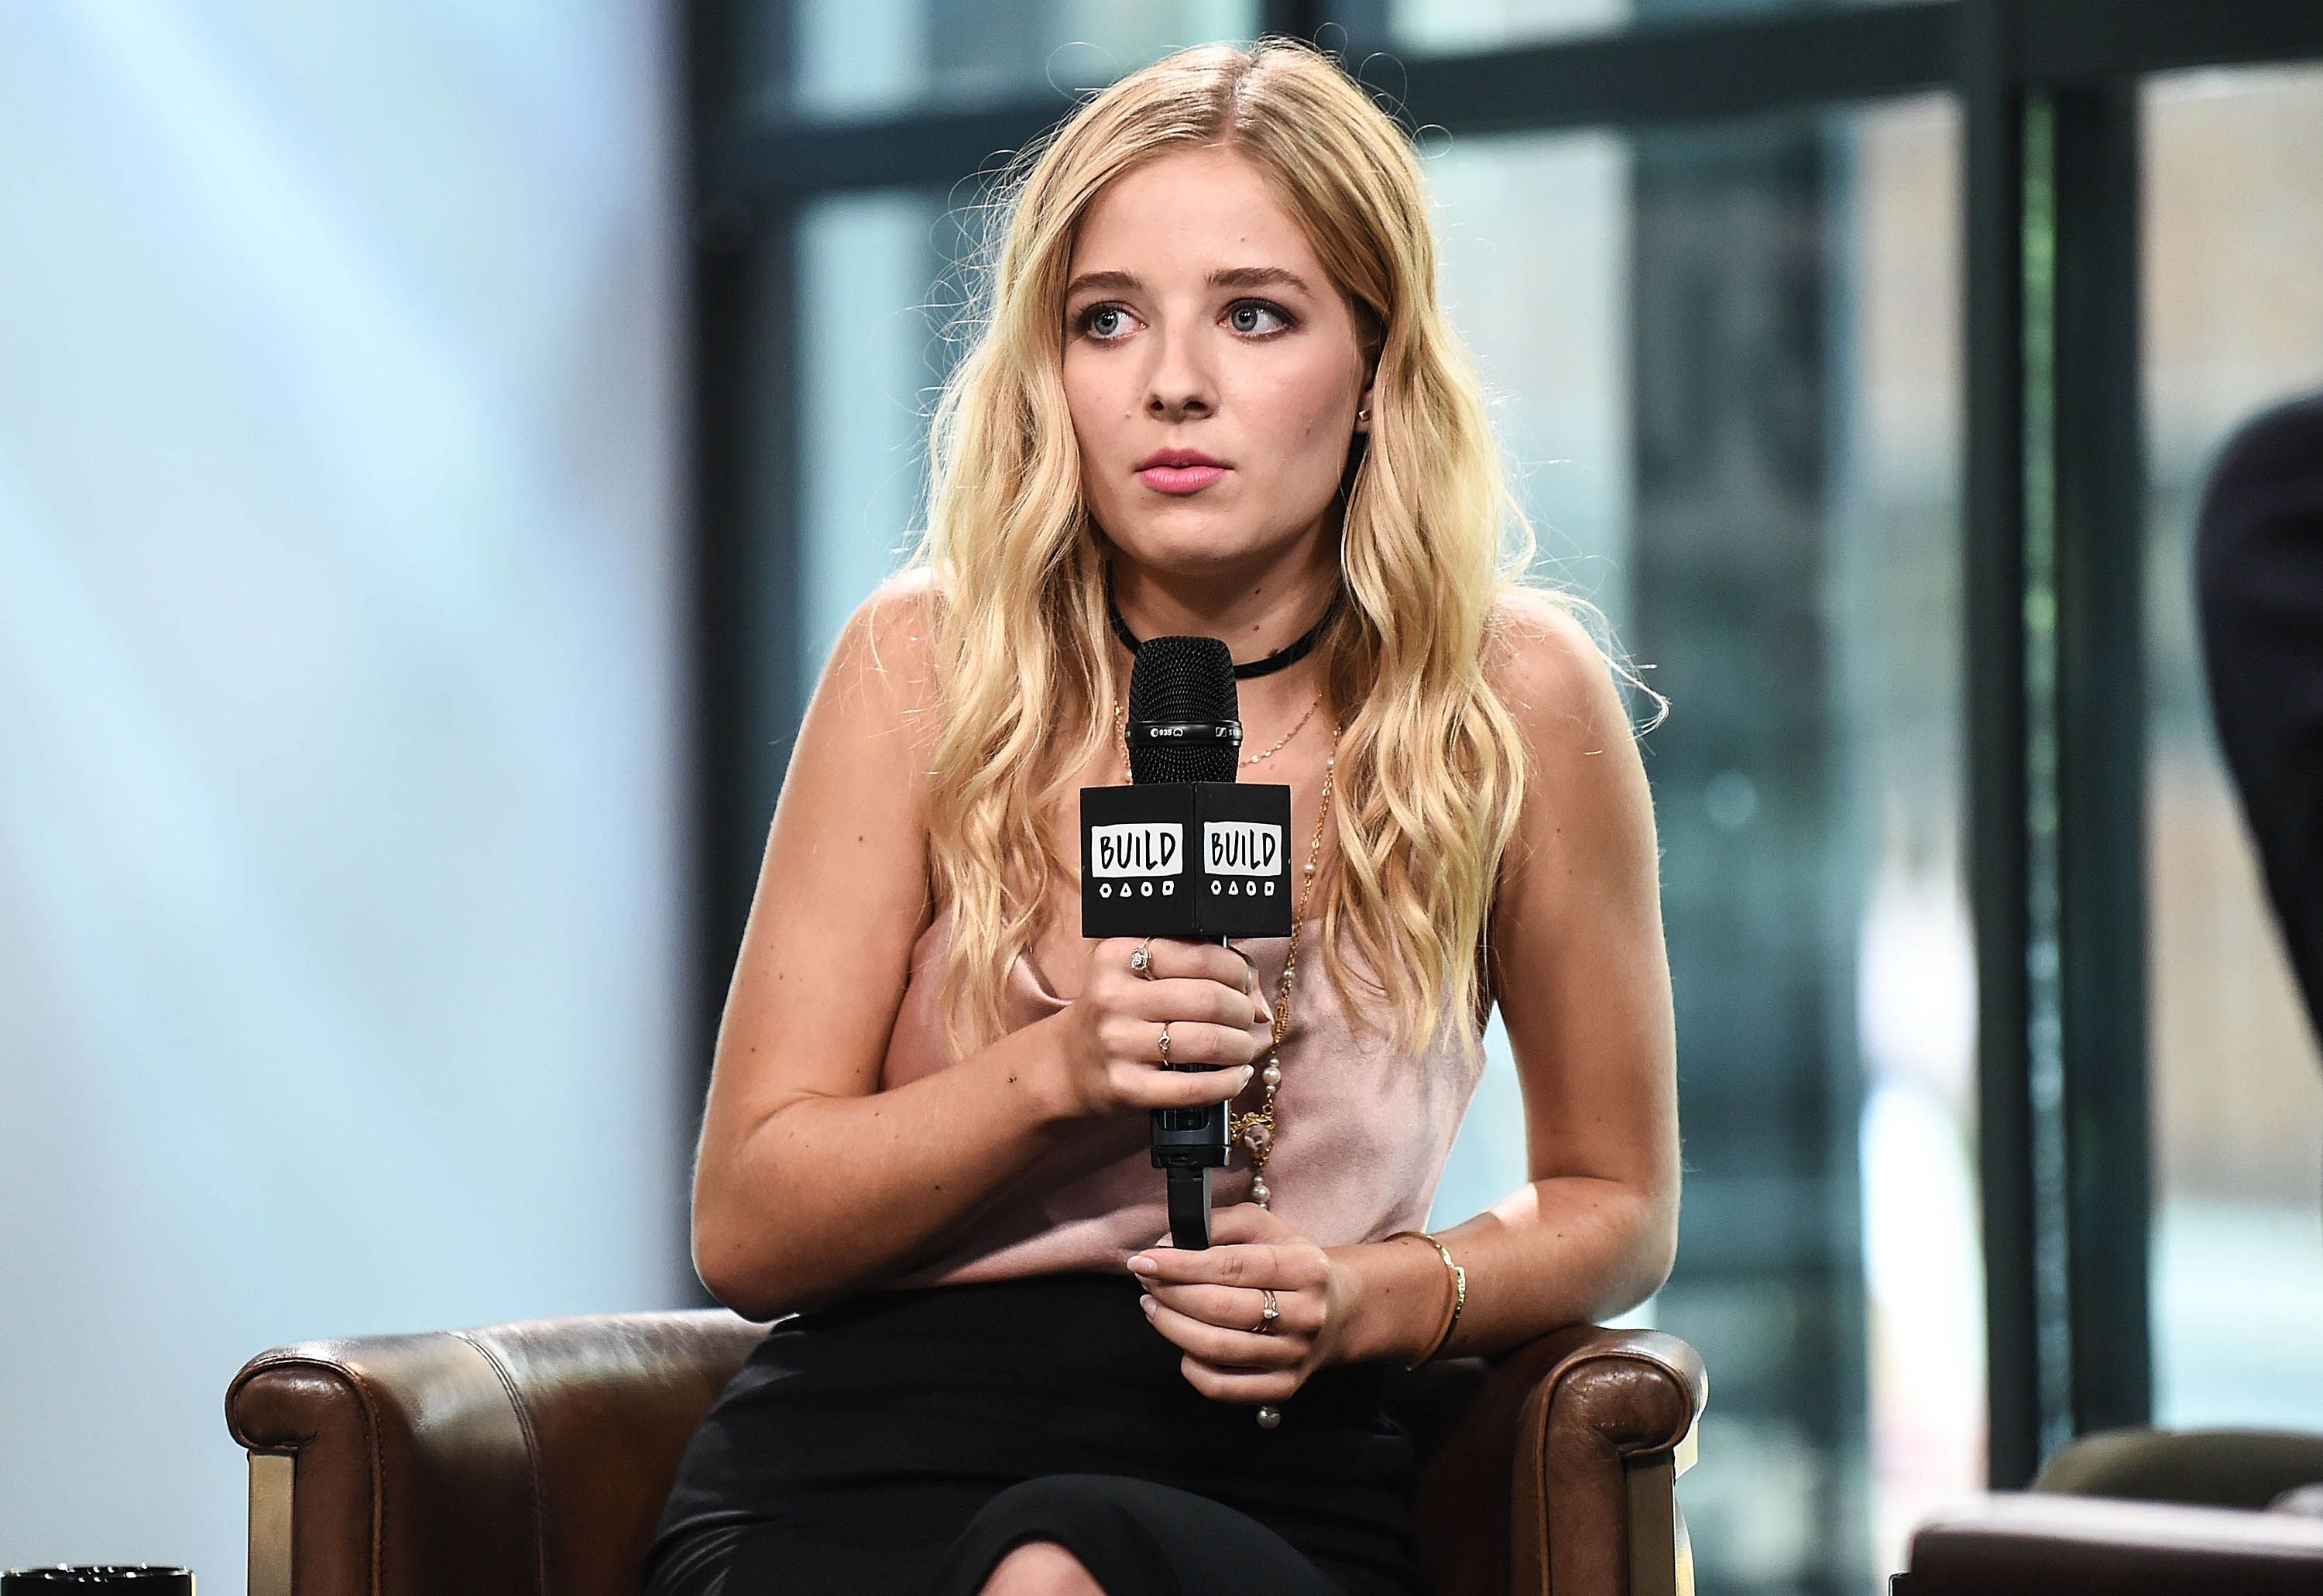 AGT's' Jackie Evancho says as a child star 'there were men who wanted to  hurt me' | CNN